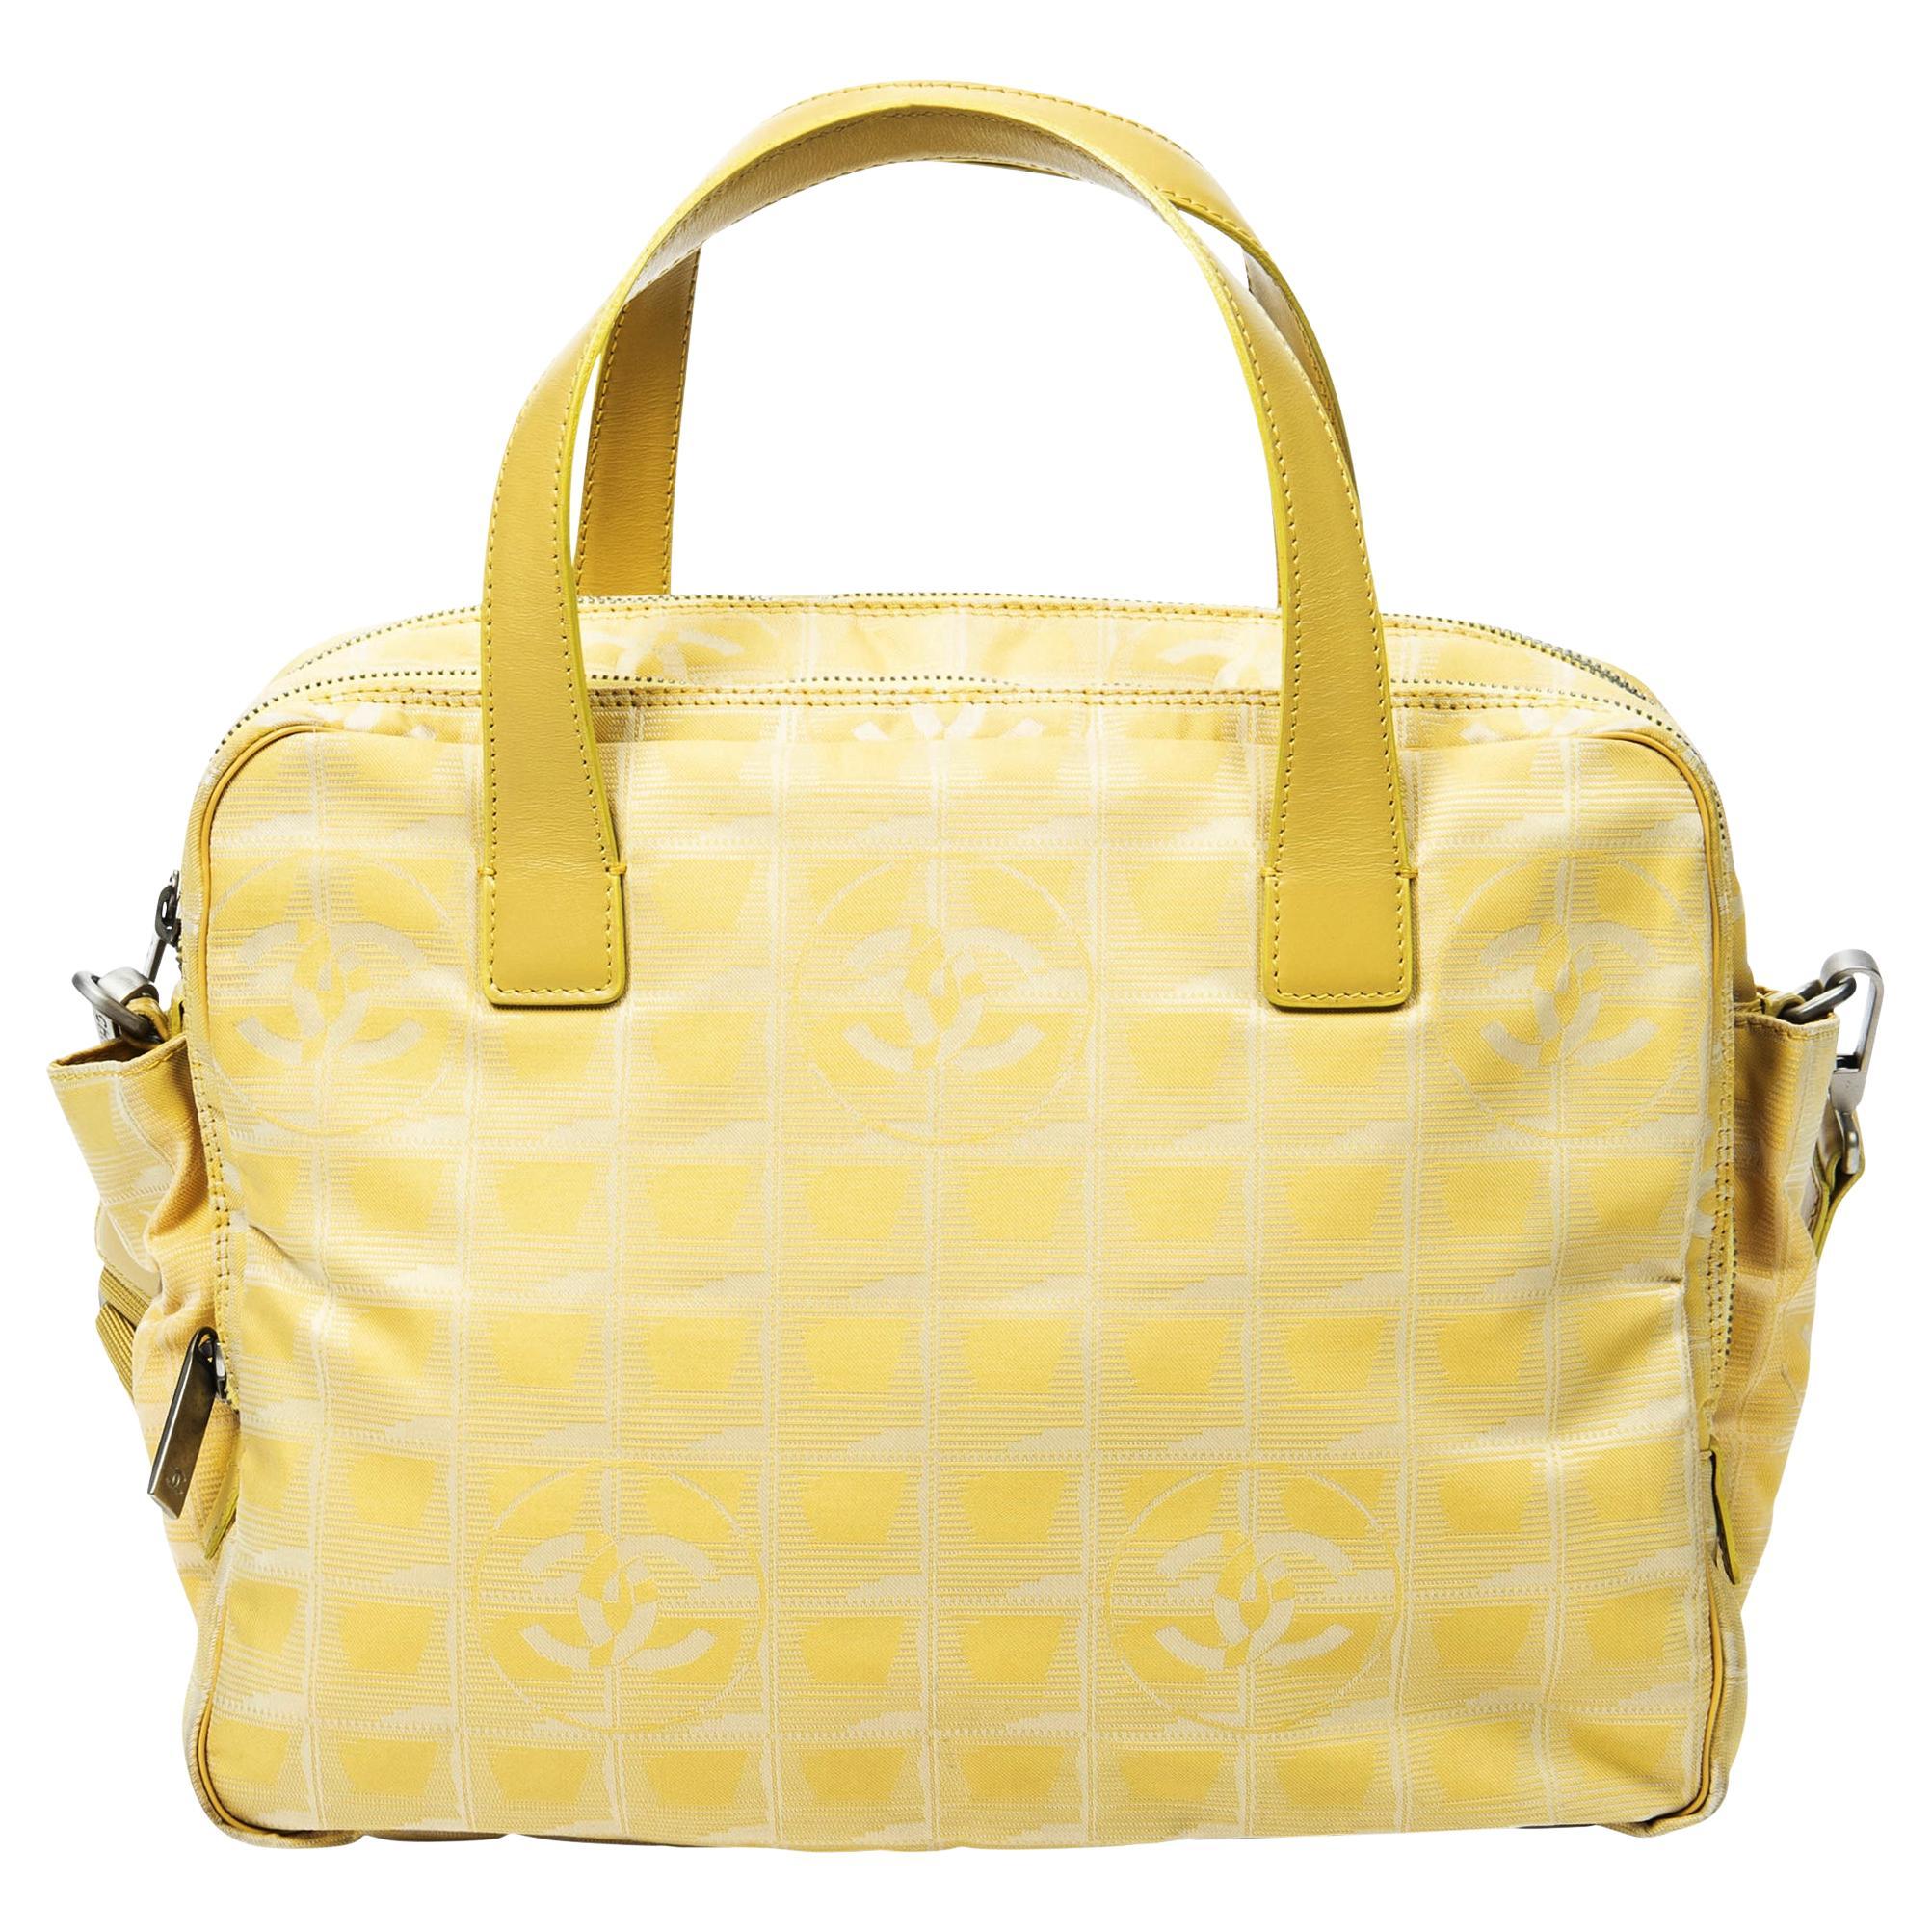 Chanel 2002 Yellow Travel Ligne Bag w/ Strap For Sale